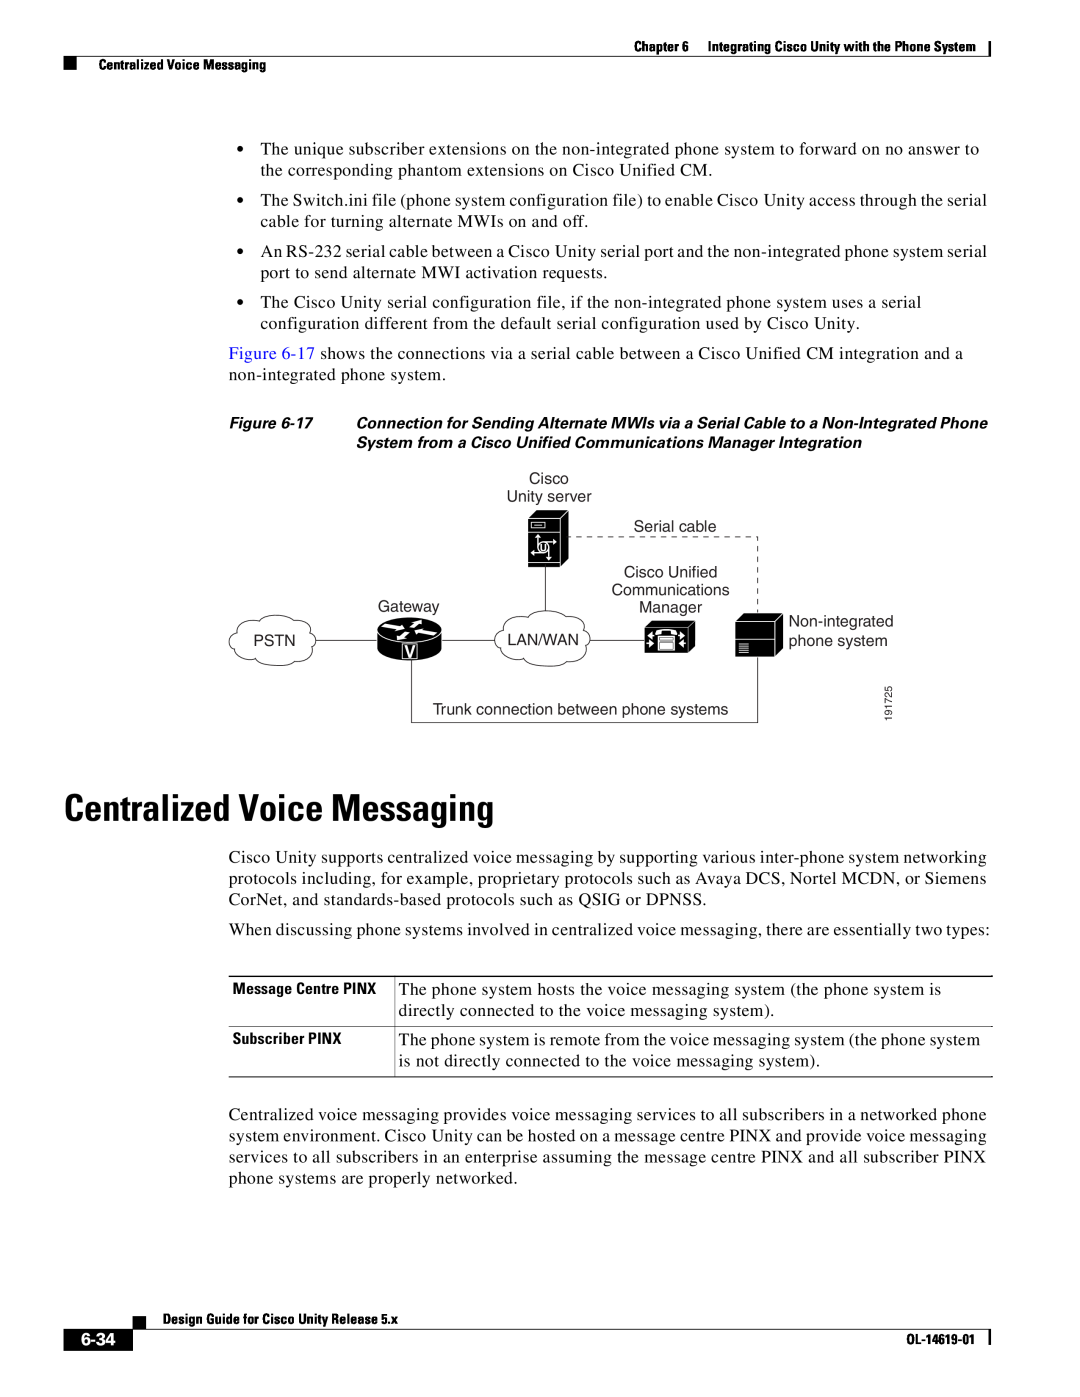 Cisco Systems OL-14619-01 manual Centralized Voice Messaging, 6-34 